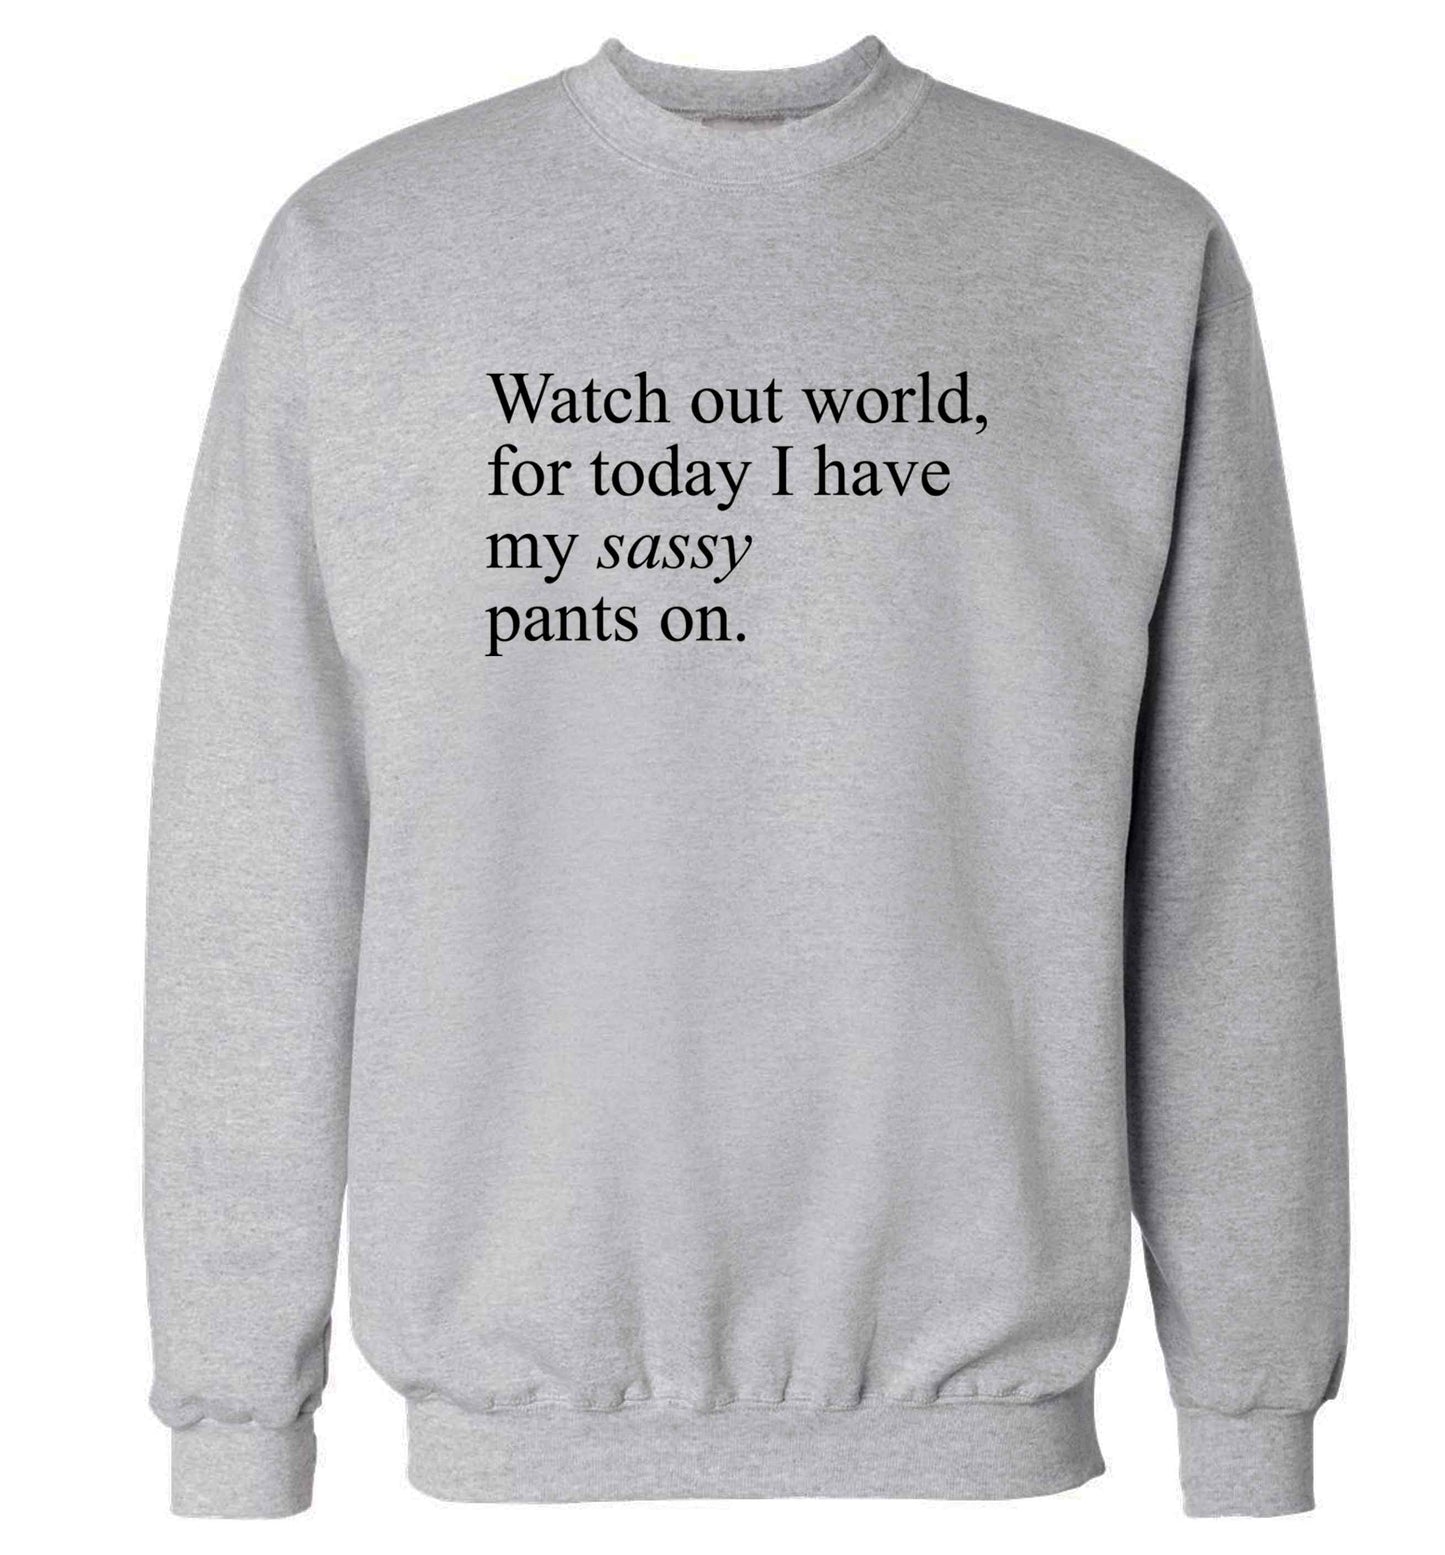 Watch out world for today I have my sassy pants on adult's unisex grey sweater 2XL